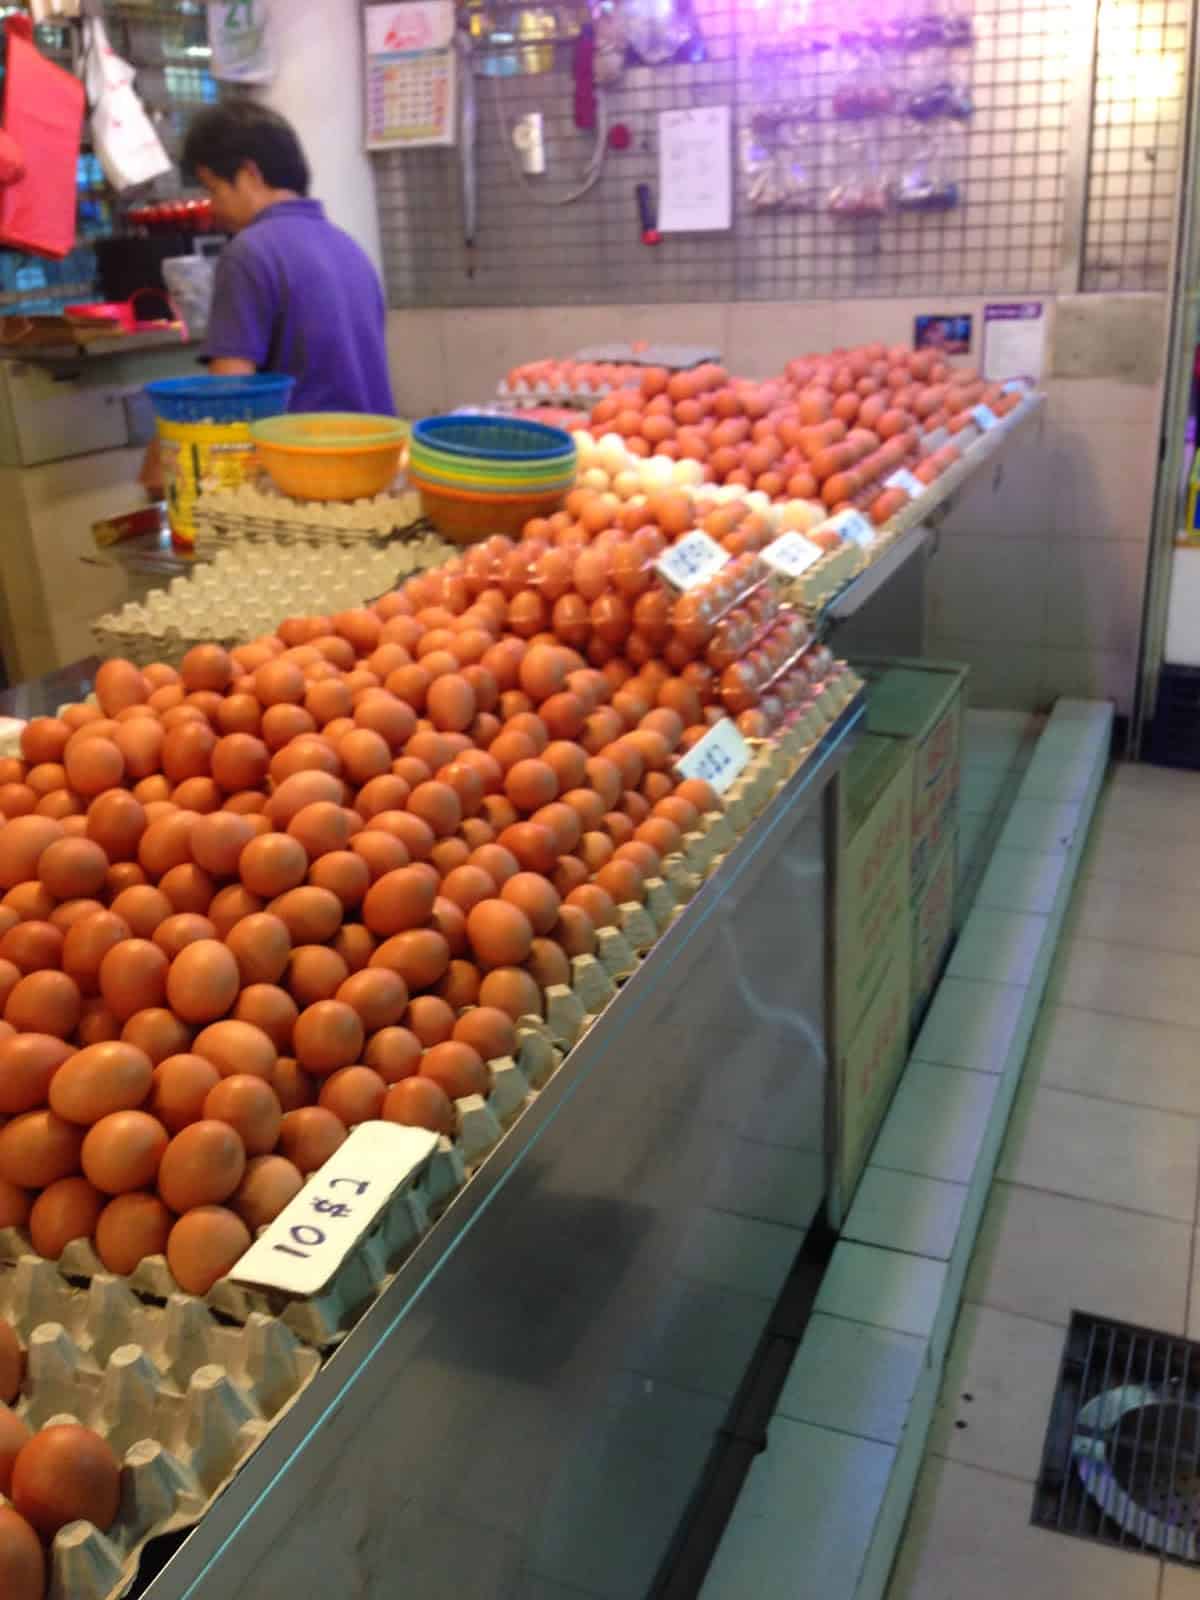 Egg stall in the market